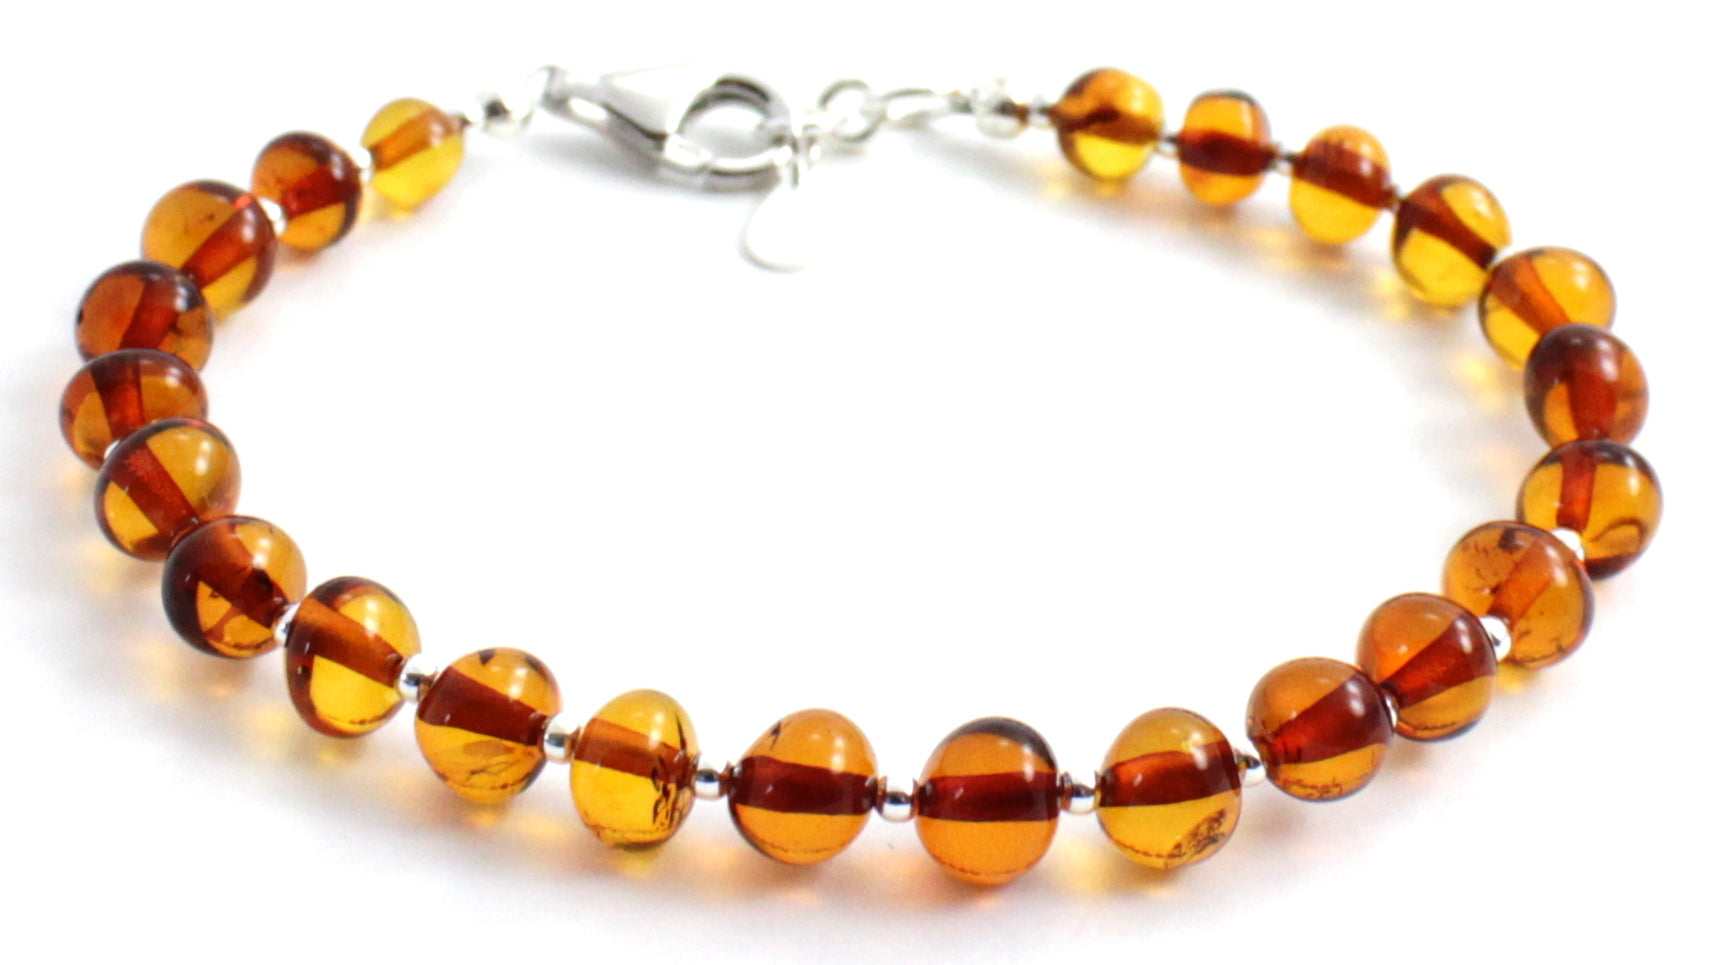 Baltic Amber Beaded Bracelet with Sterling Silver 925 for Men and Women - Cognac Brown Gemstone Jewelry Bijou Her